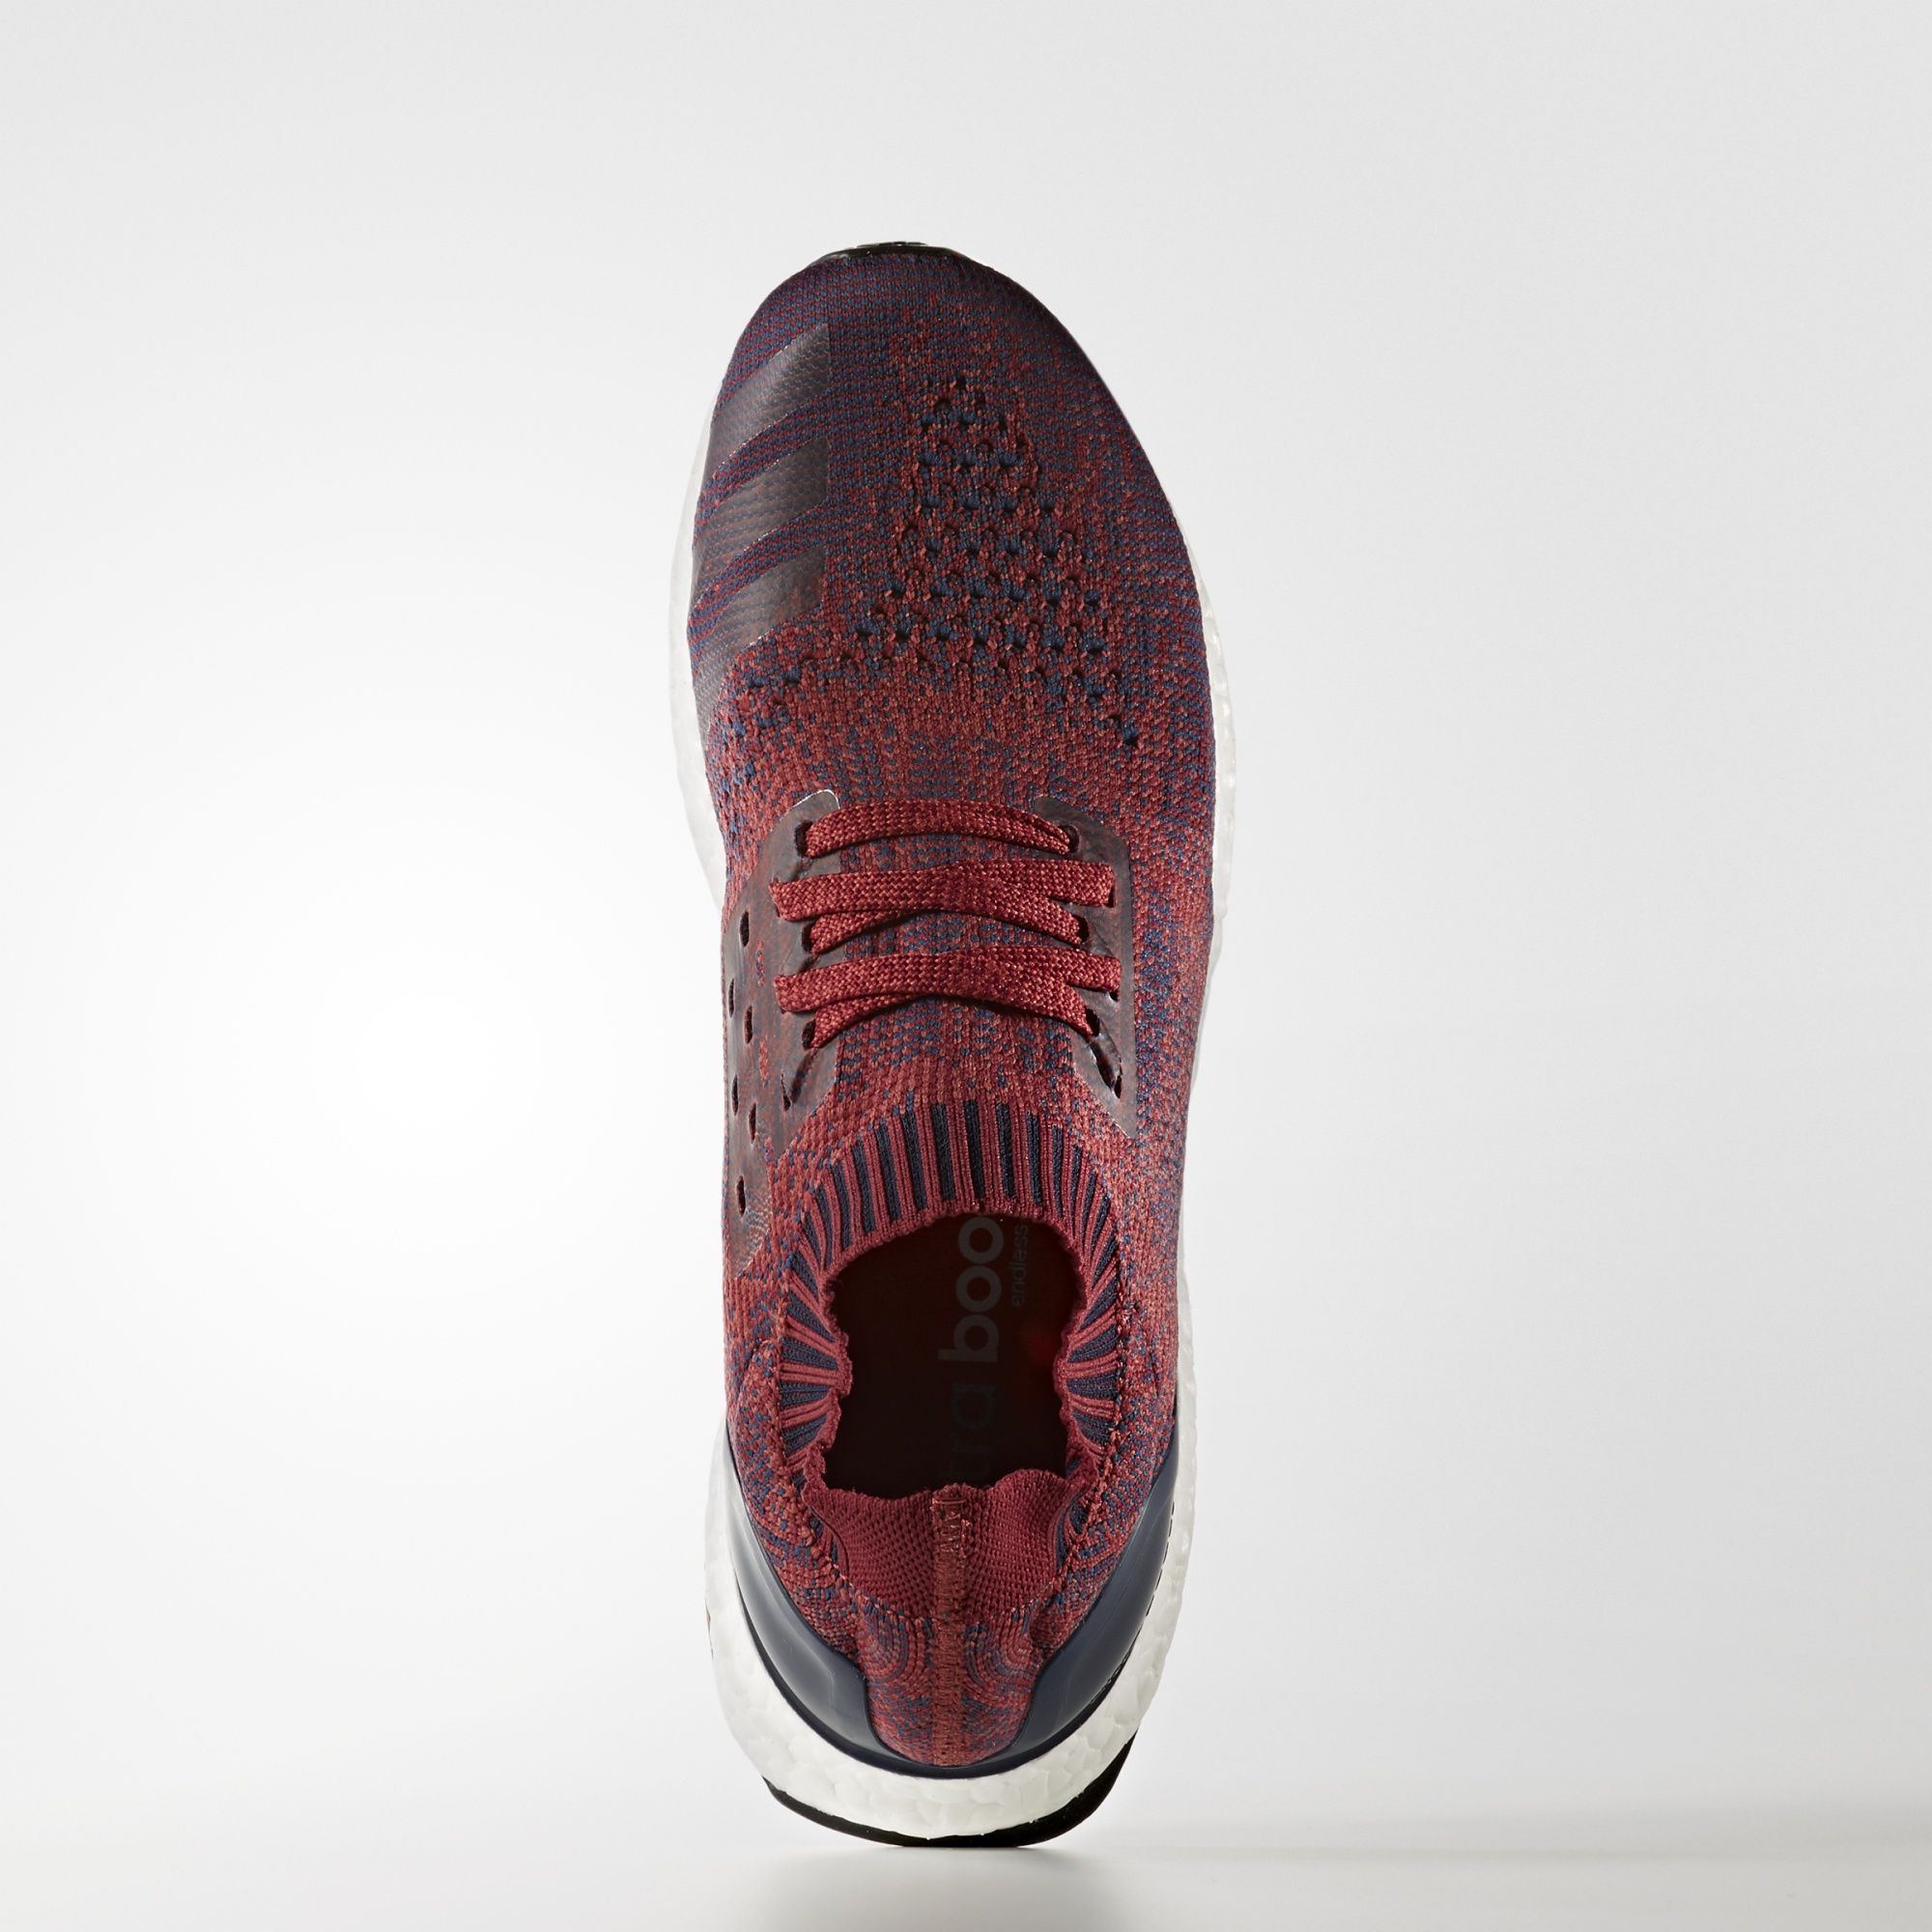 Adidas Ultra Boost Uncaged
Mystery Red / Burgundy